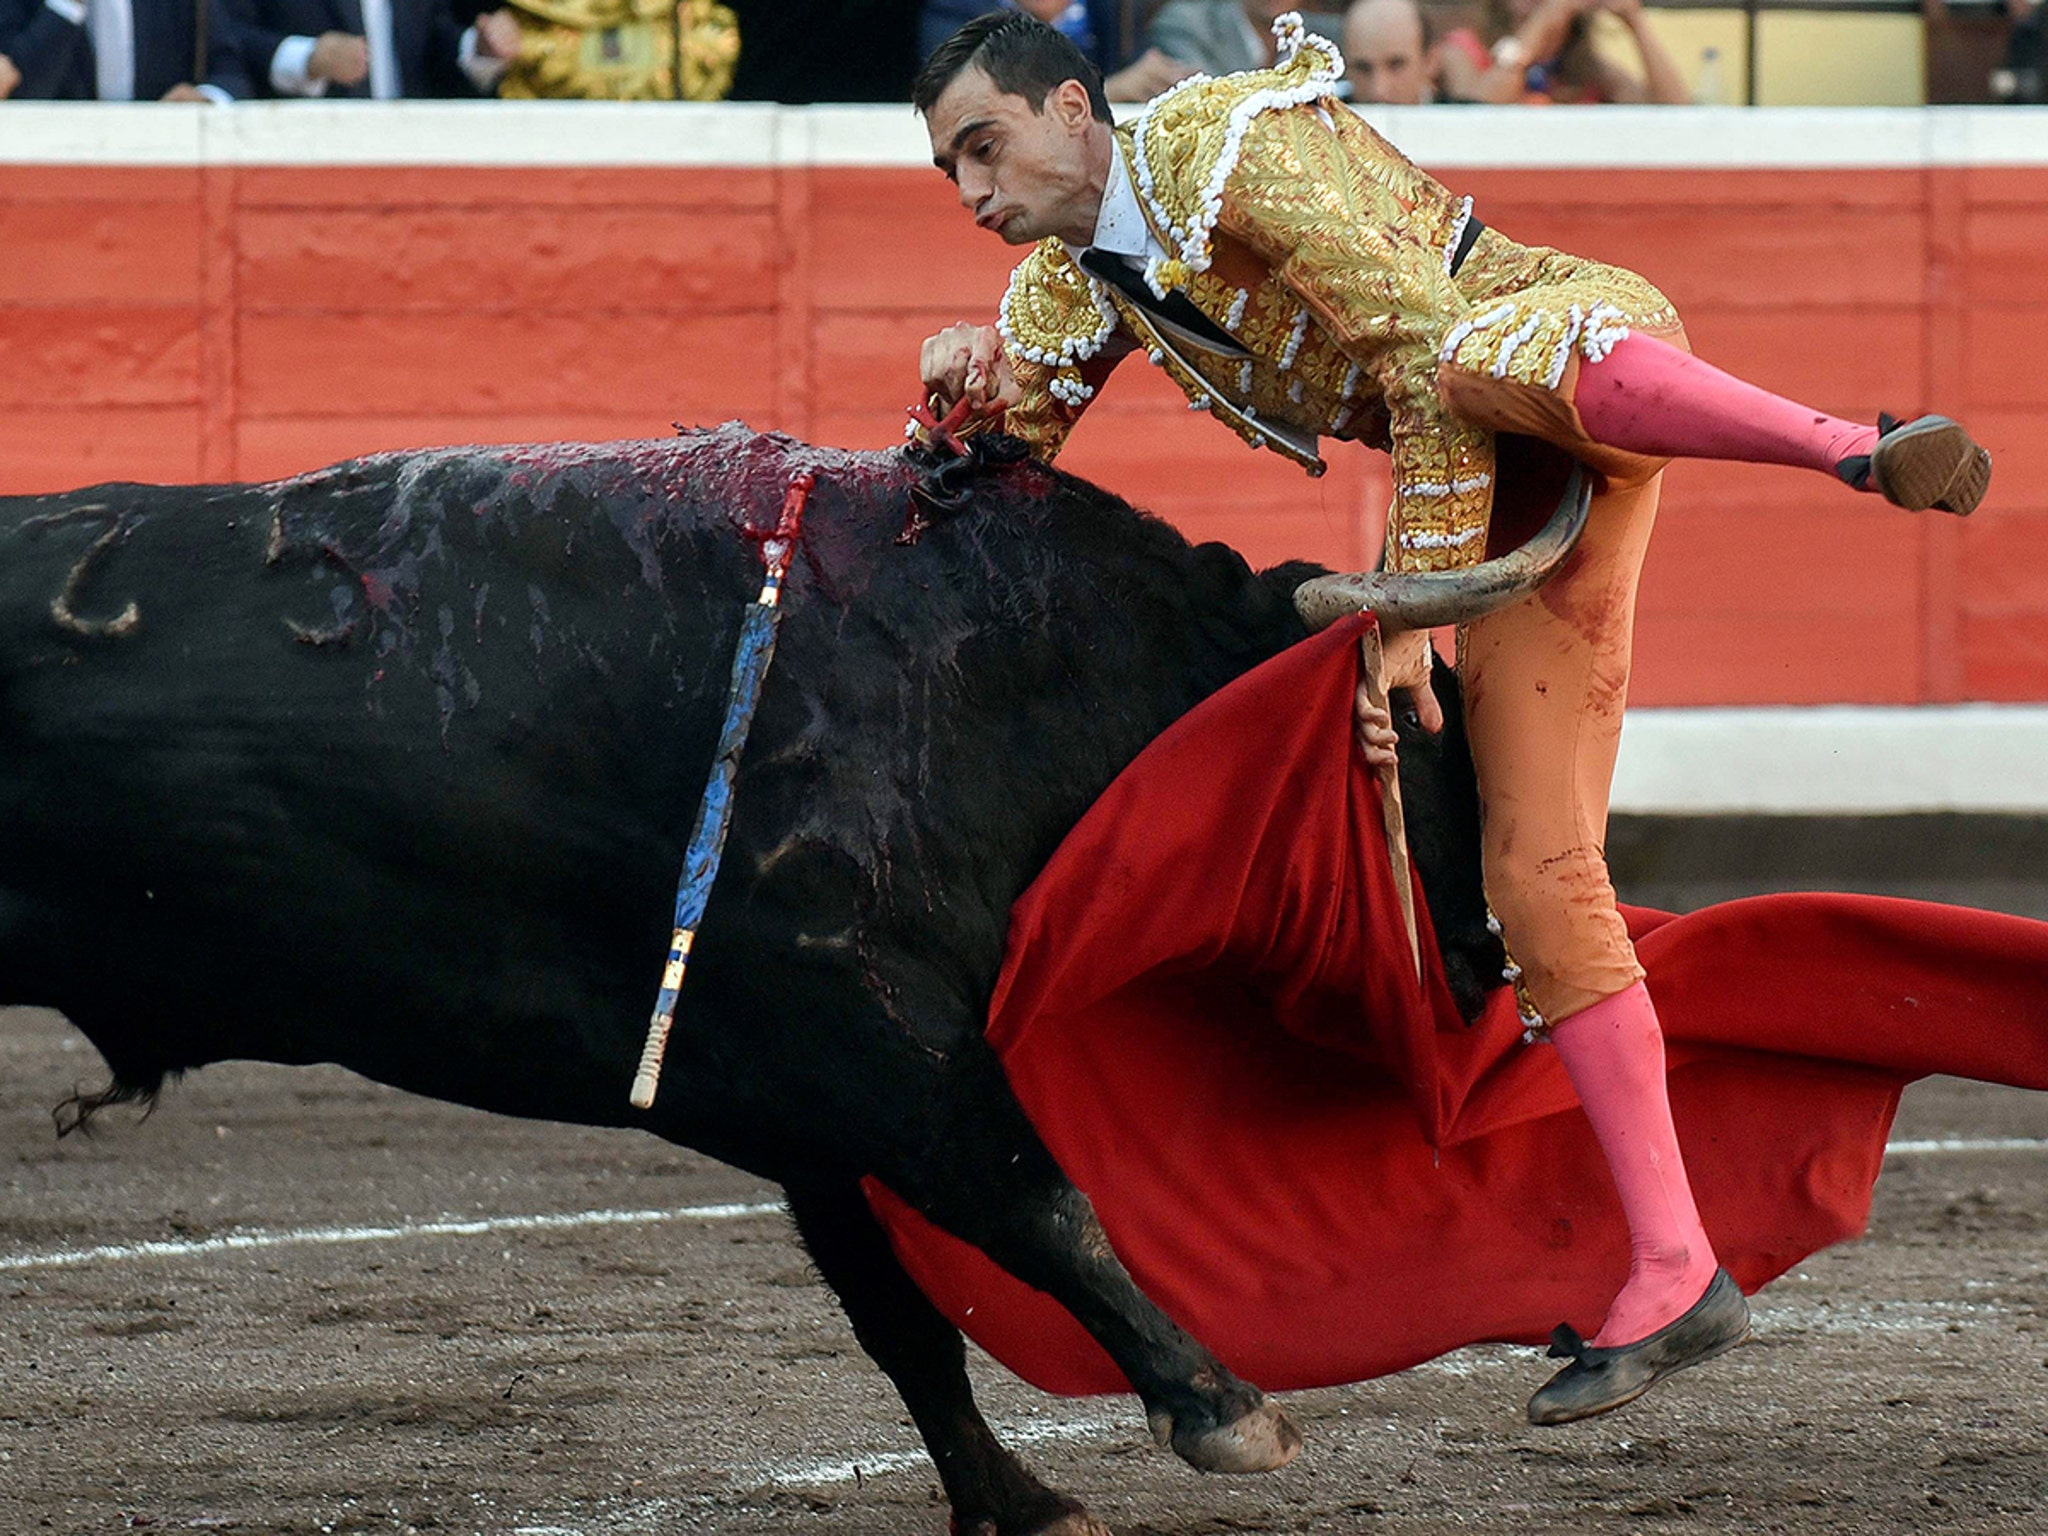 Bullfighter Gored In the Crotch In Spain